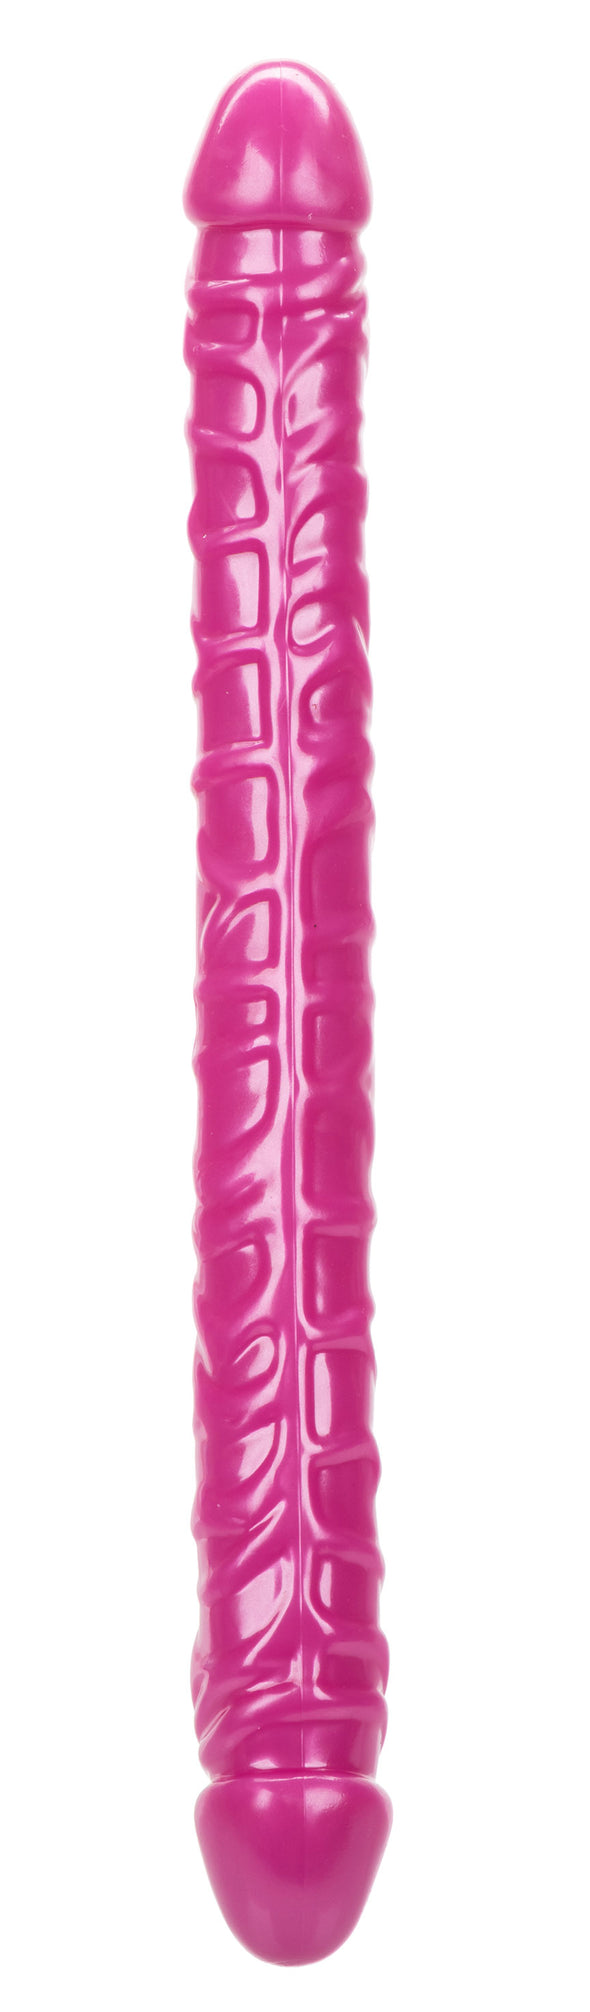 Size Queen 17 inch/43.25 Cm - Pink-Dildos & Dongs-CalExotics-Andy's Adult World